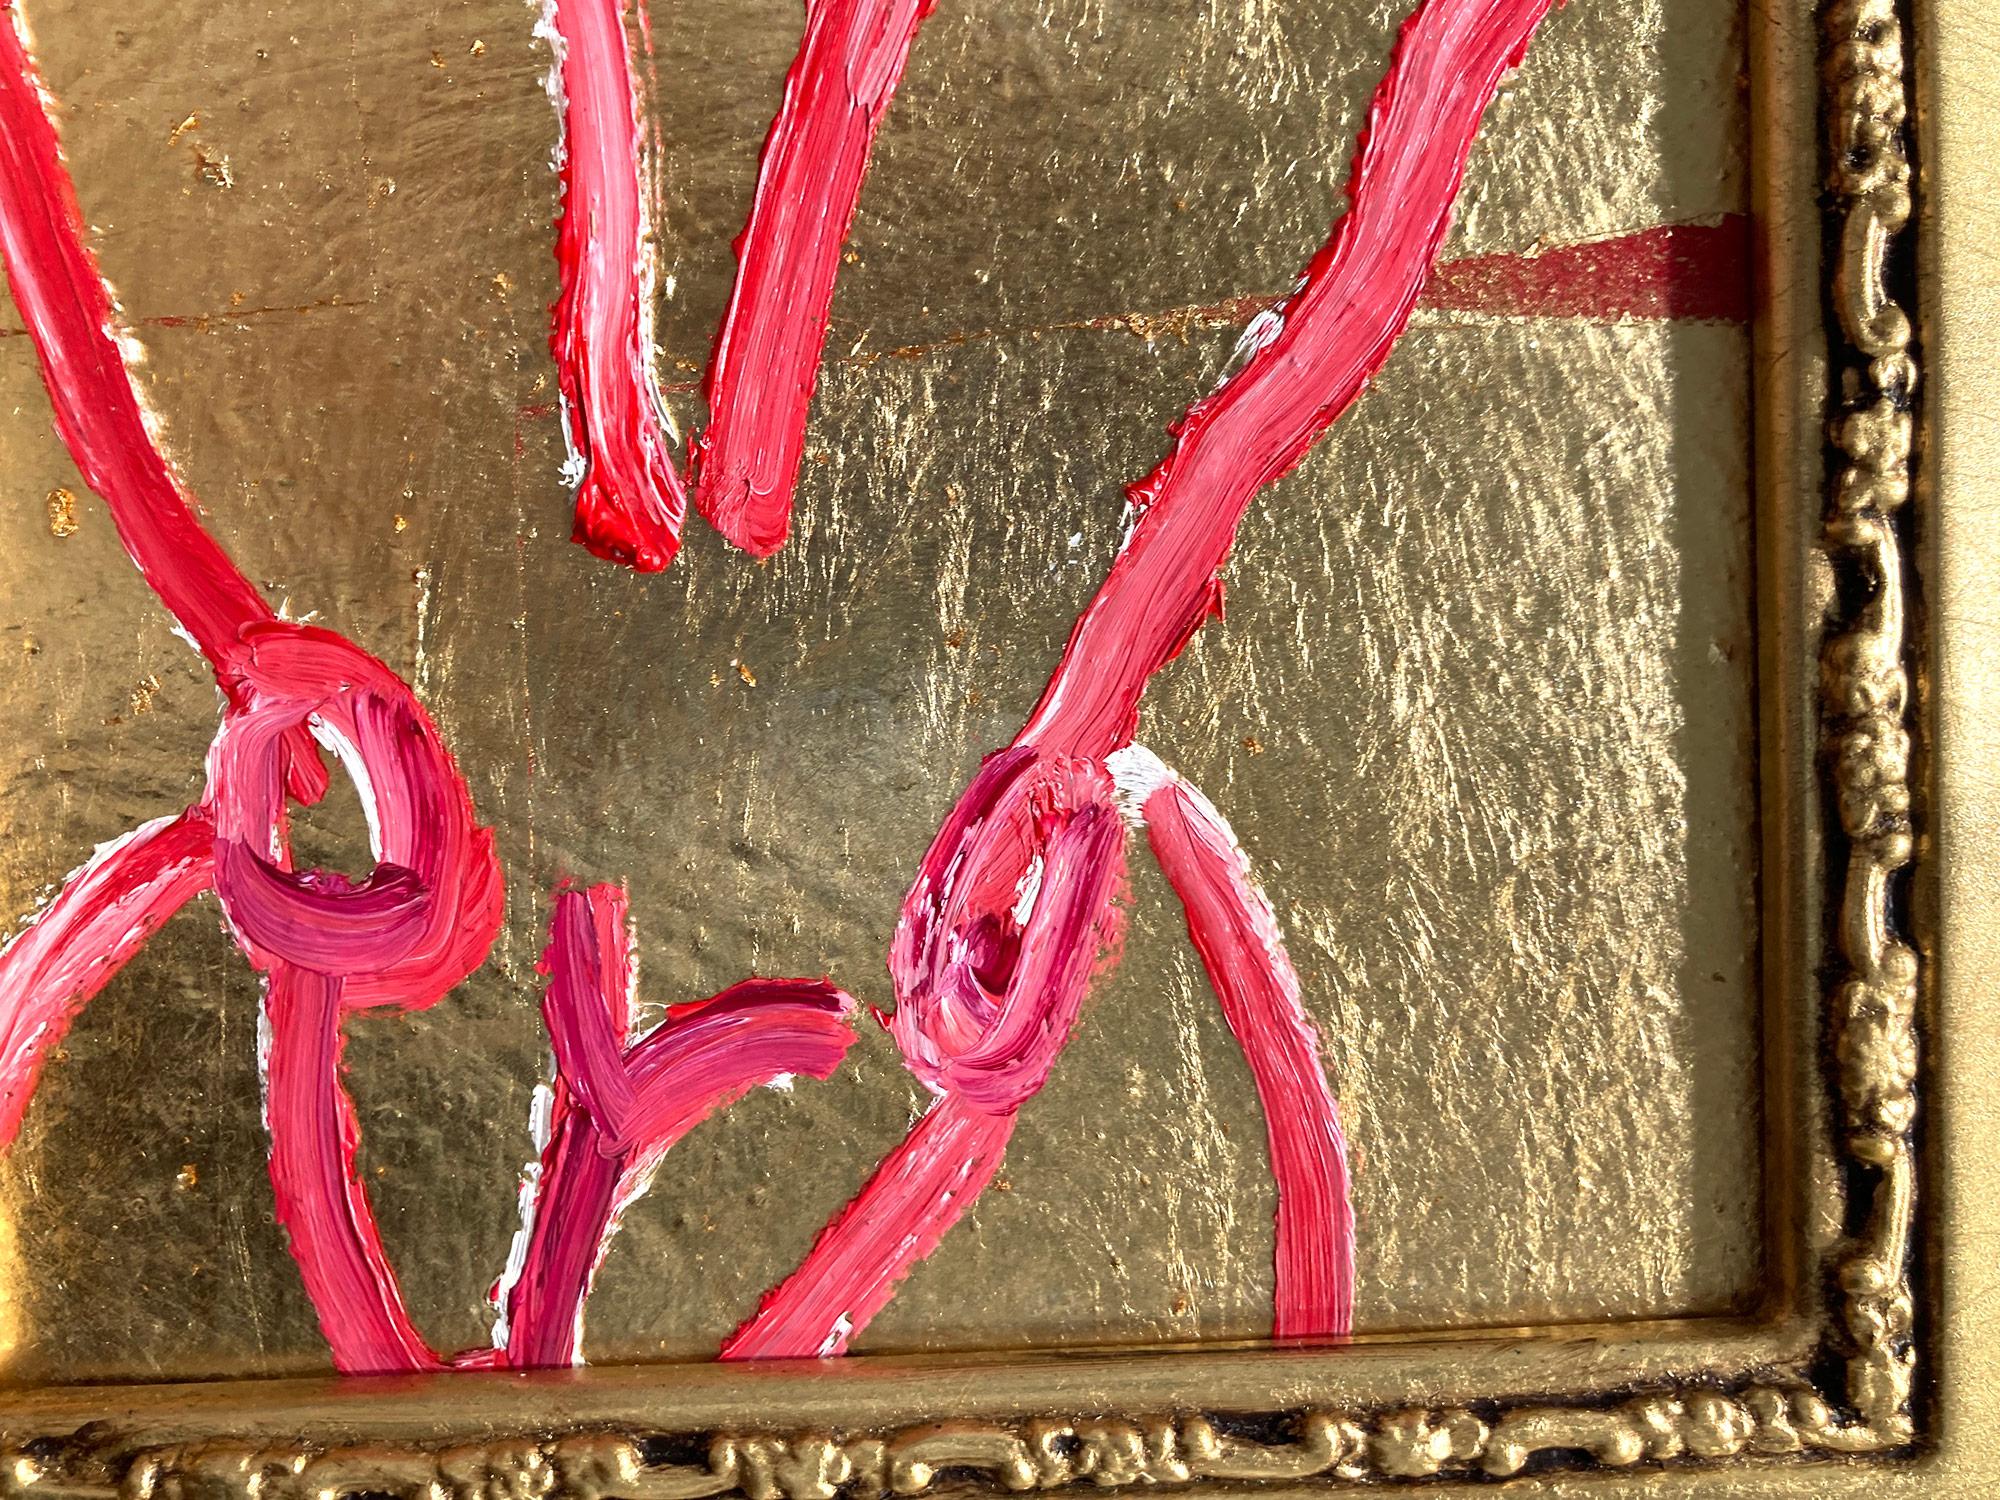 A wonderful composition of one of Slonem's most iconic subjects, Bunnies. This piece depicts a gestural figure of a pink bunny on a Gold Leaf background with thick use of paint. It is housed in a wonderful gold antique frame. Inspired by nature and